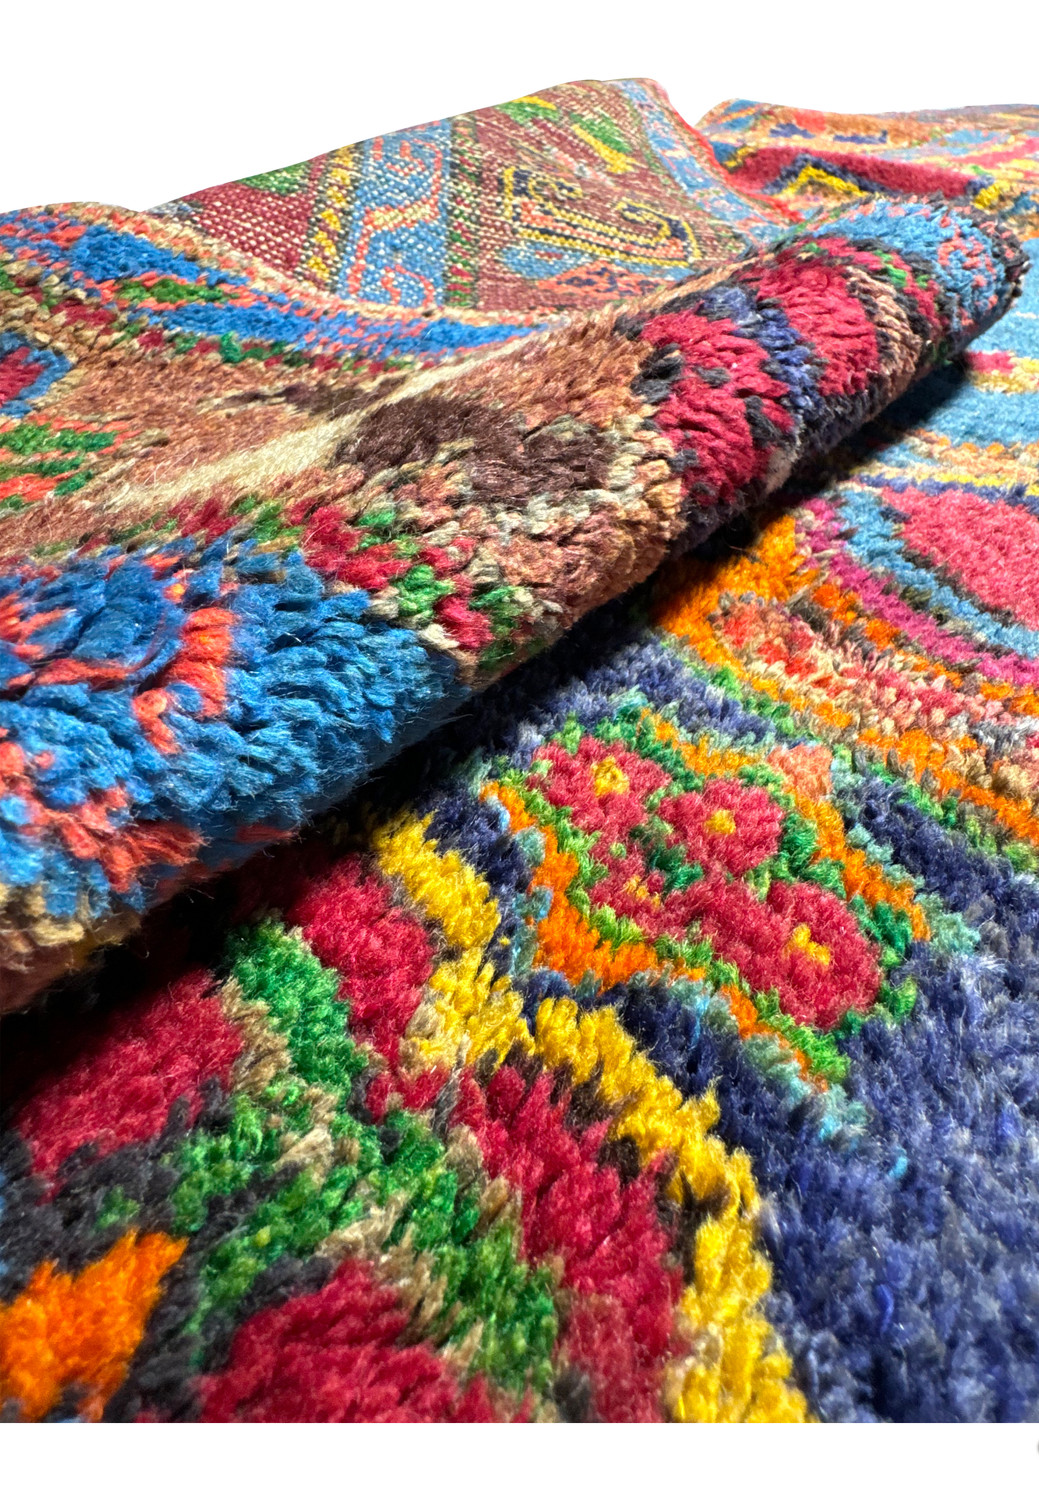 Close-up texture detail of a Russian Kazak rug, highlighting the intricate craftsmanship and rich colors of the hand-knotted wool fibers, with vibrant hues of blue, red, green, and yellow creating a detailed pattern